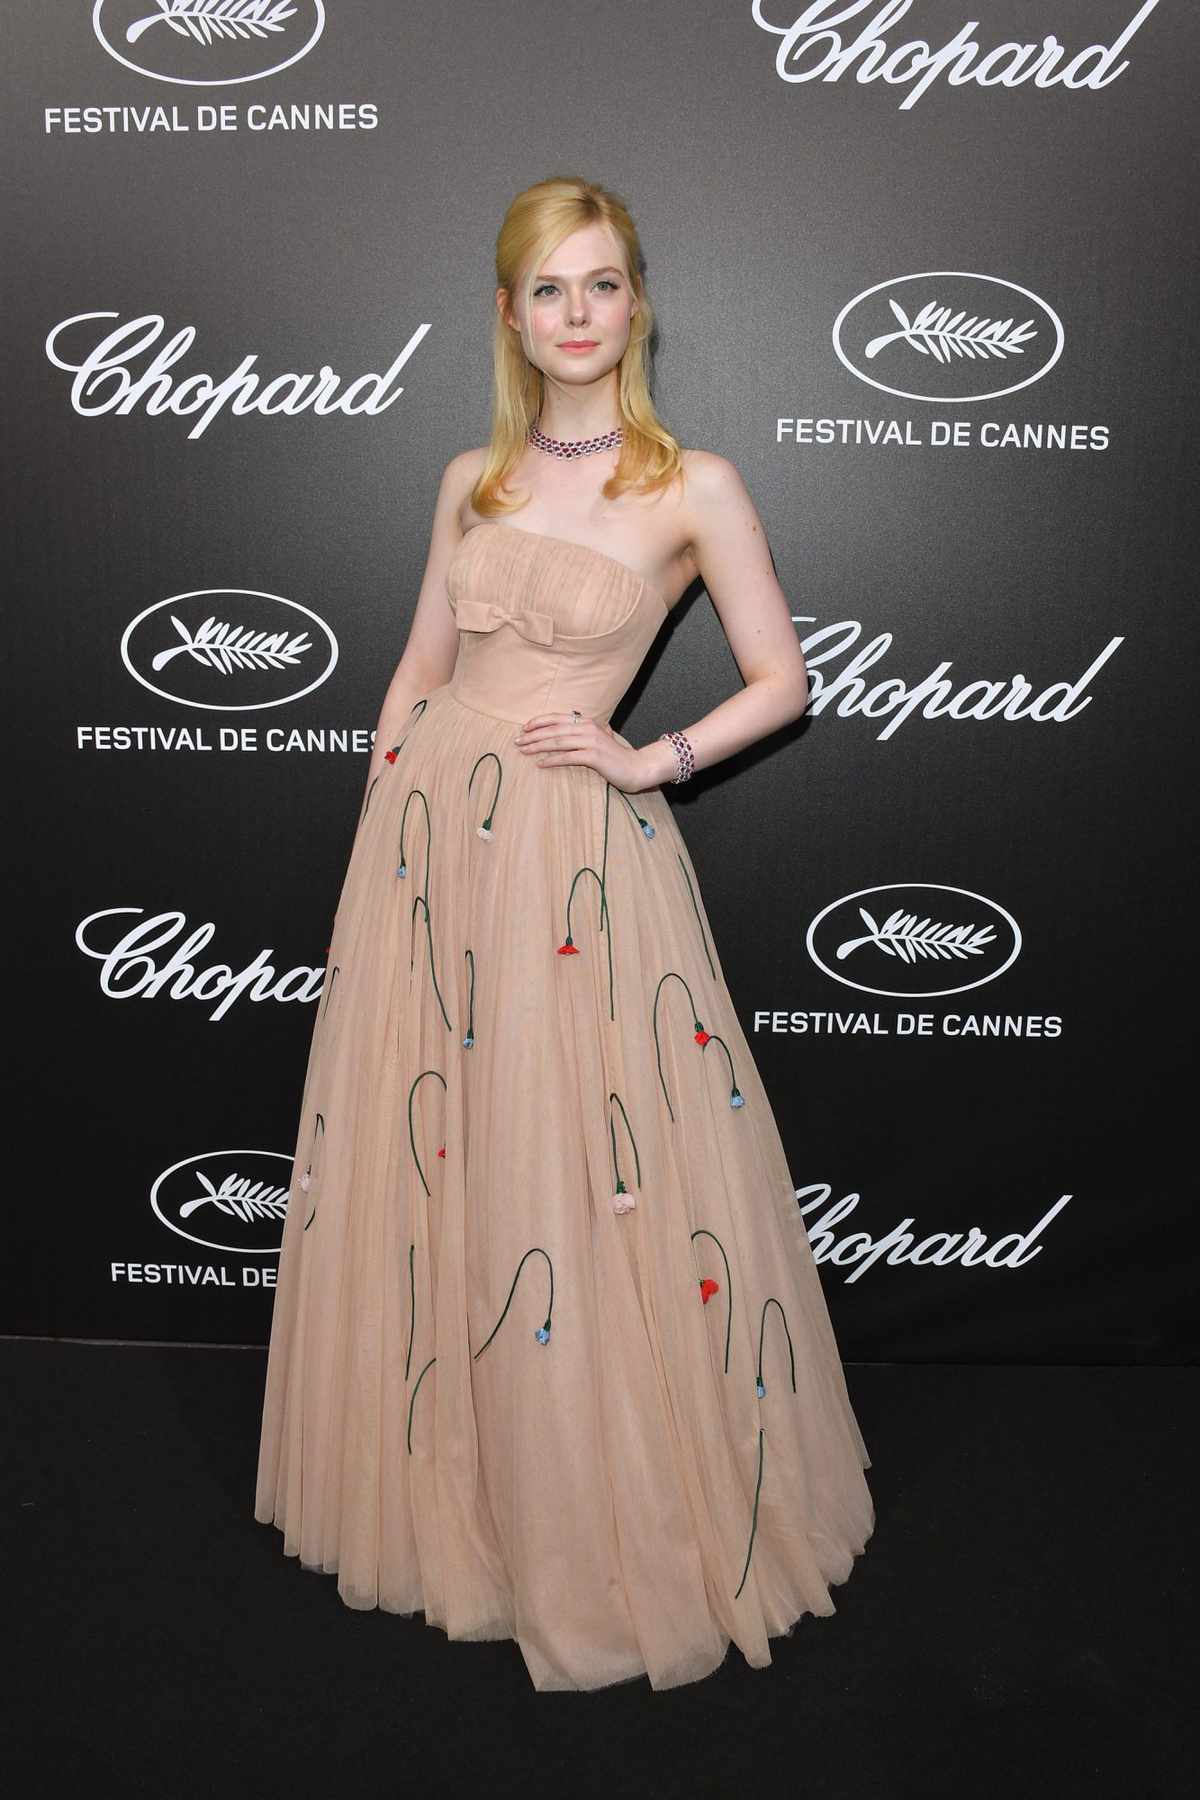 Chopard Trophy - The 72nd Annual Cannes Film Festival